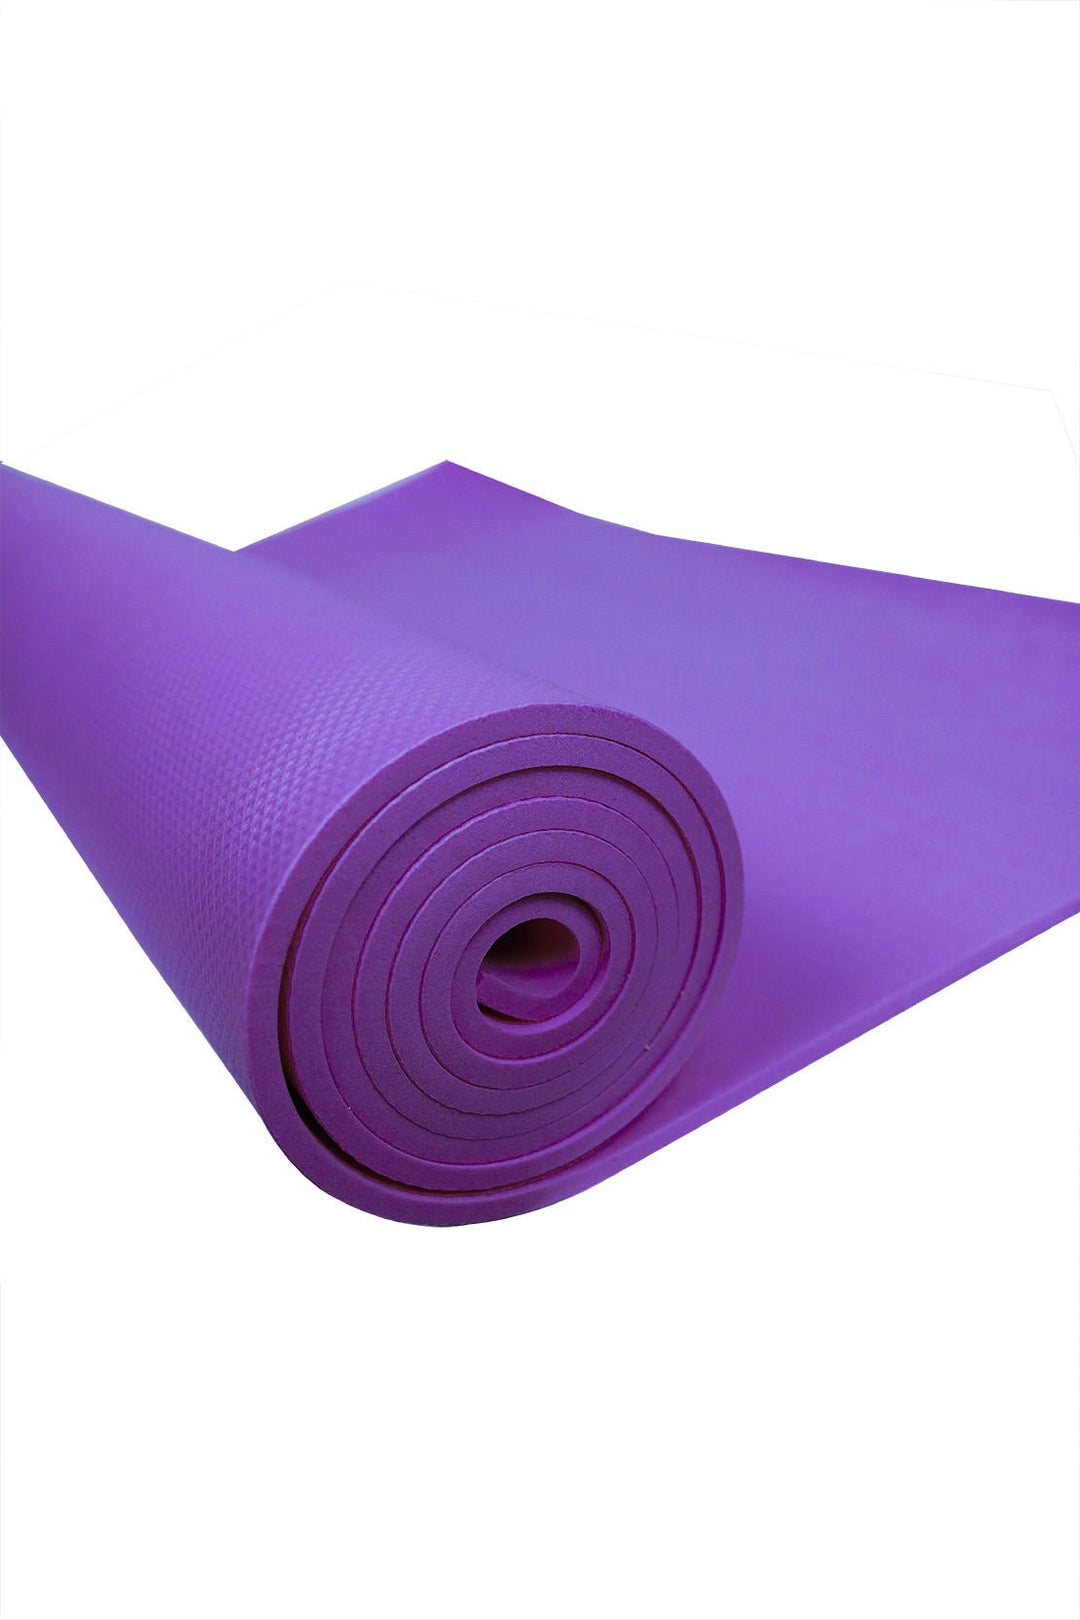 6 mm Thick Yoga Mat for Indoor and Outdoor Use, Purple - V Surfaces